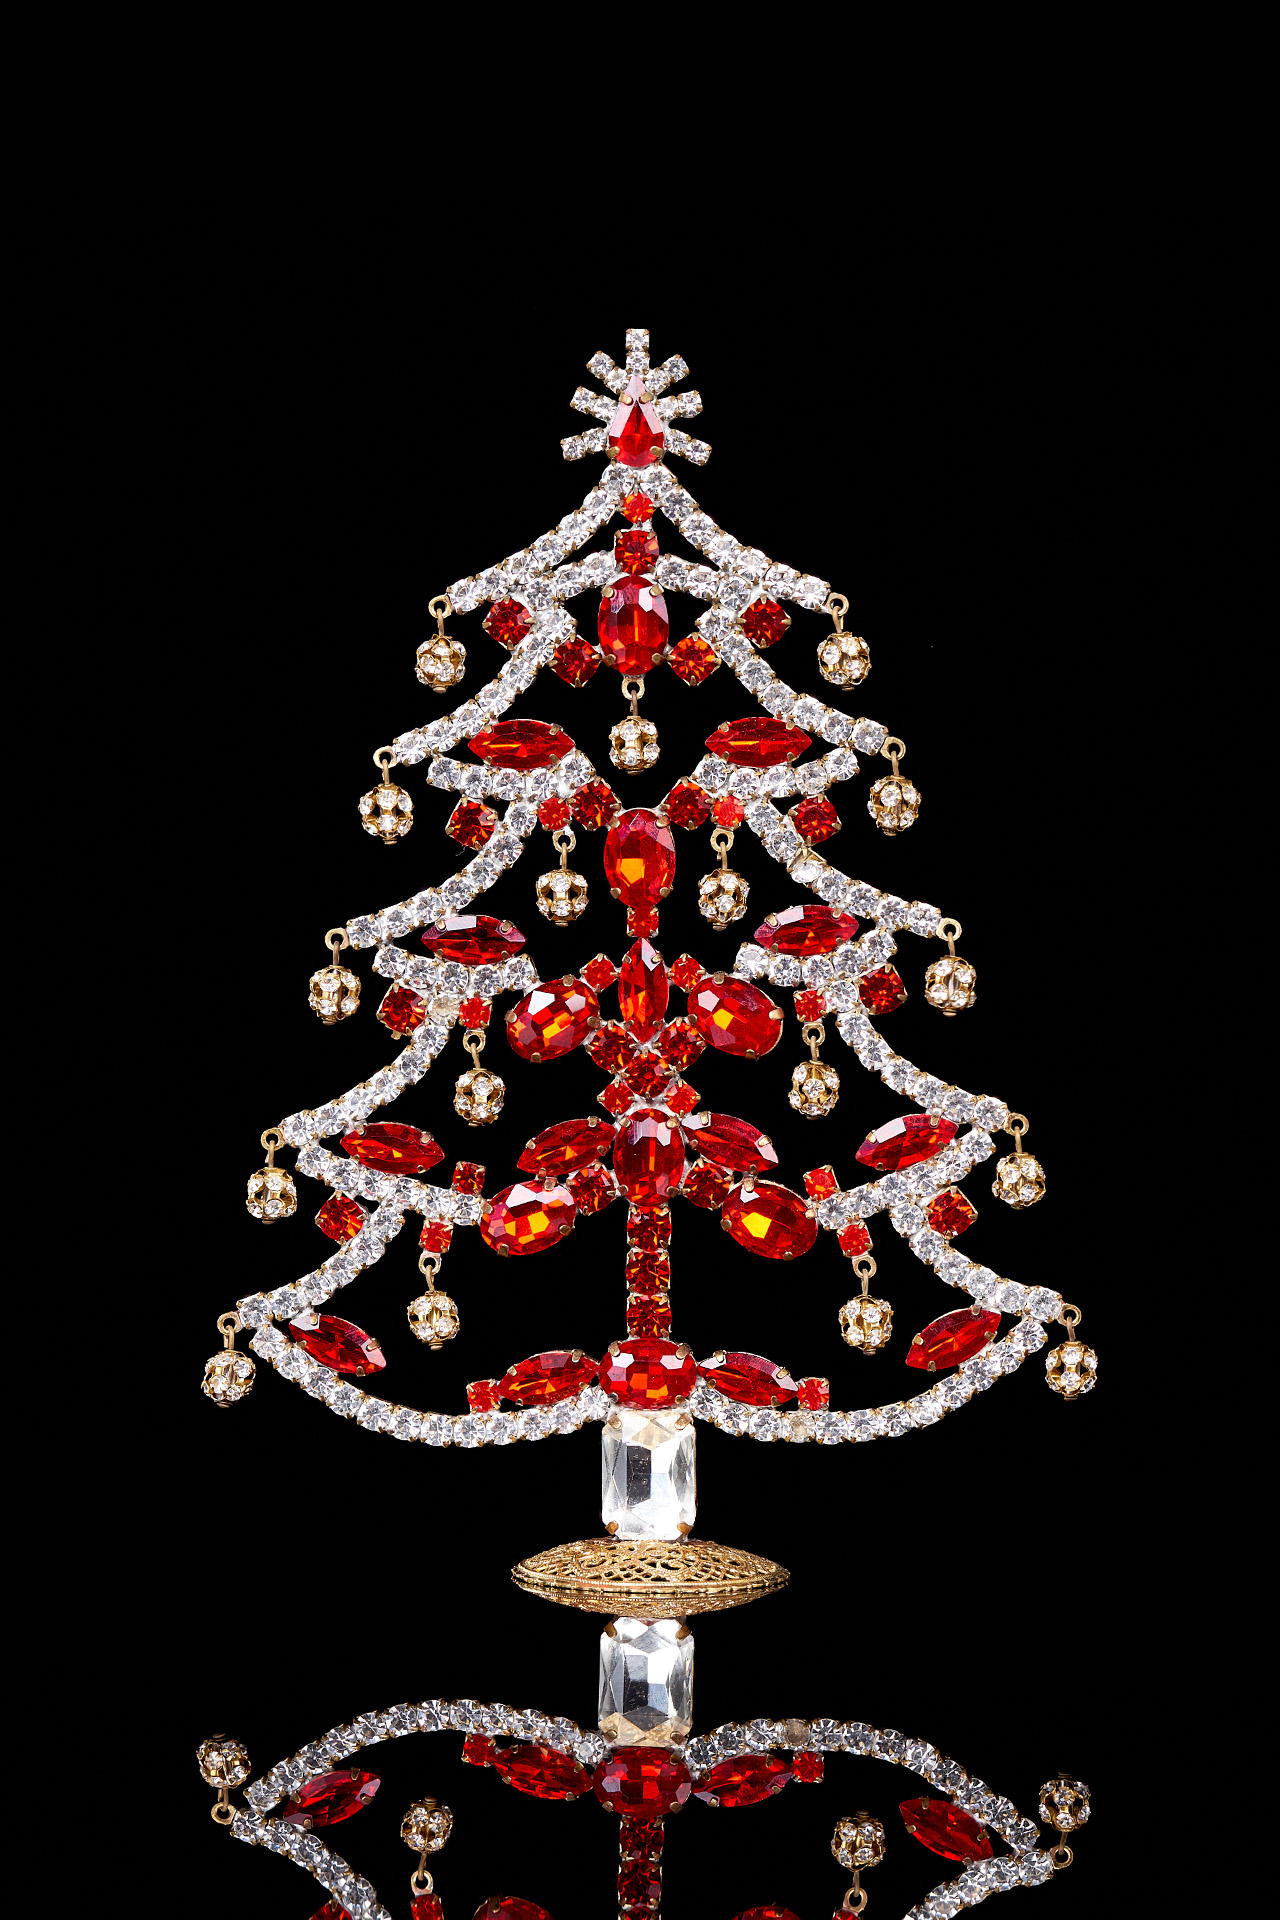 Crystalline Christmas tree decorated from red rhinestones